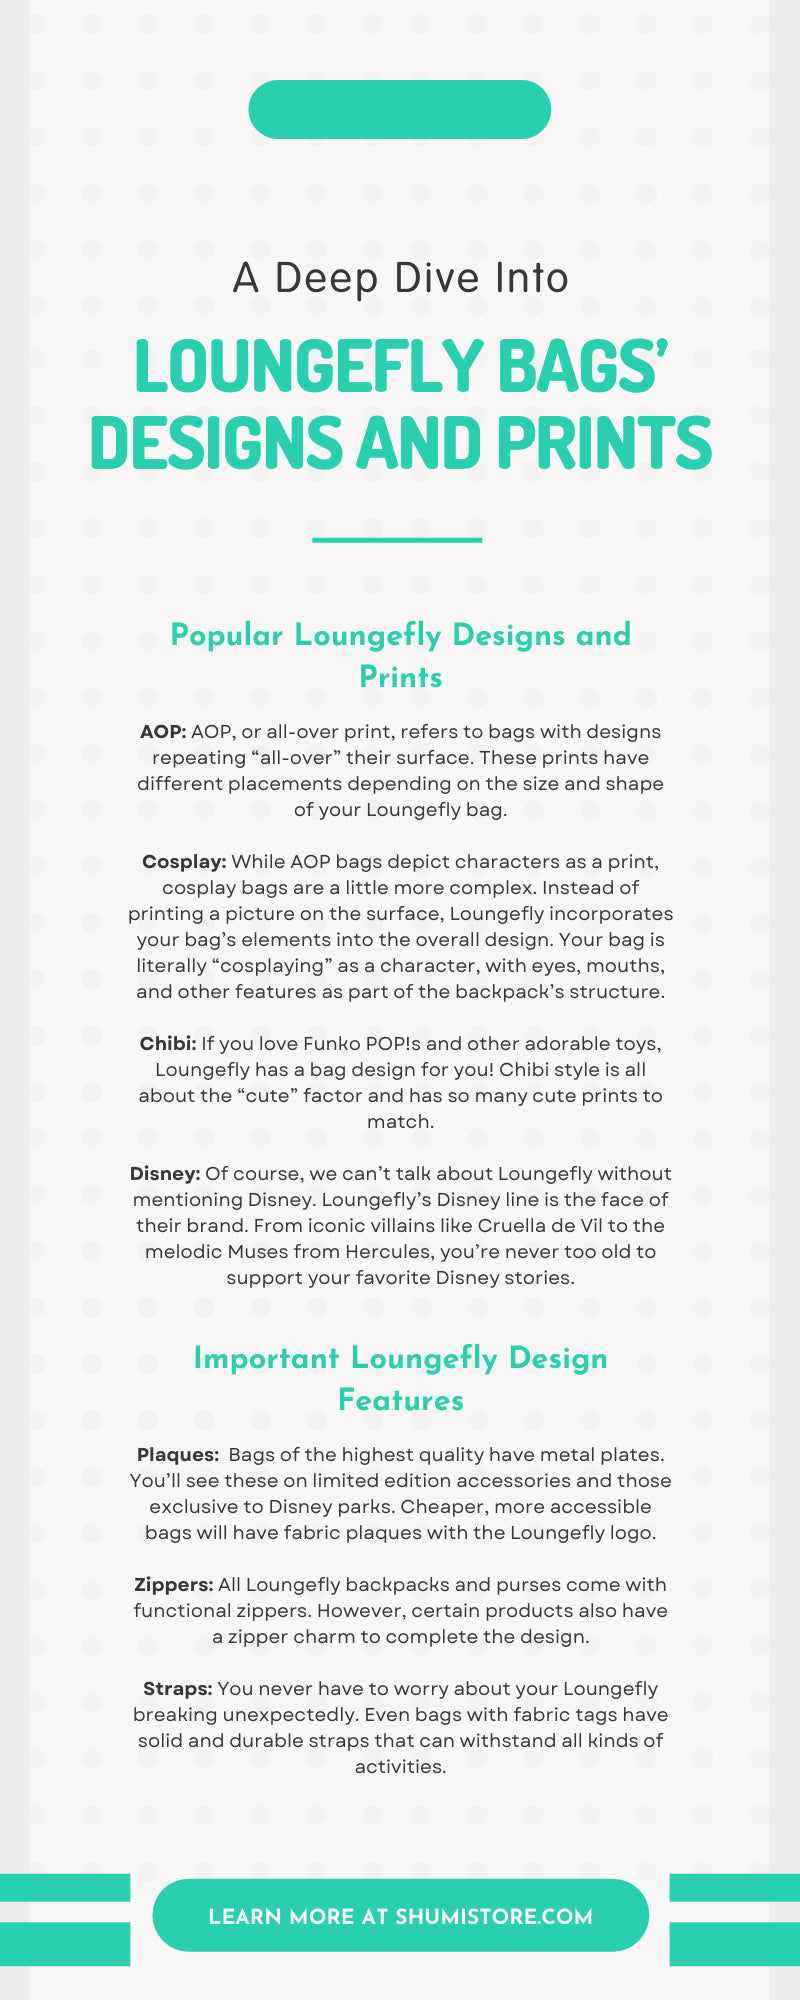 A Deep Dive Into Loungefly Bags’ Designs and Prints